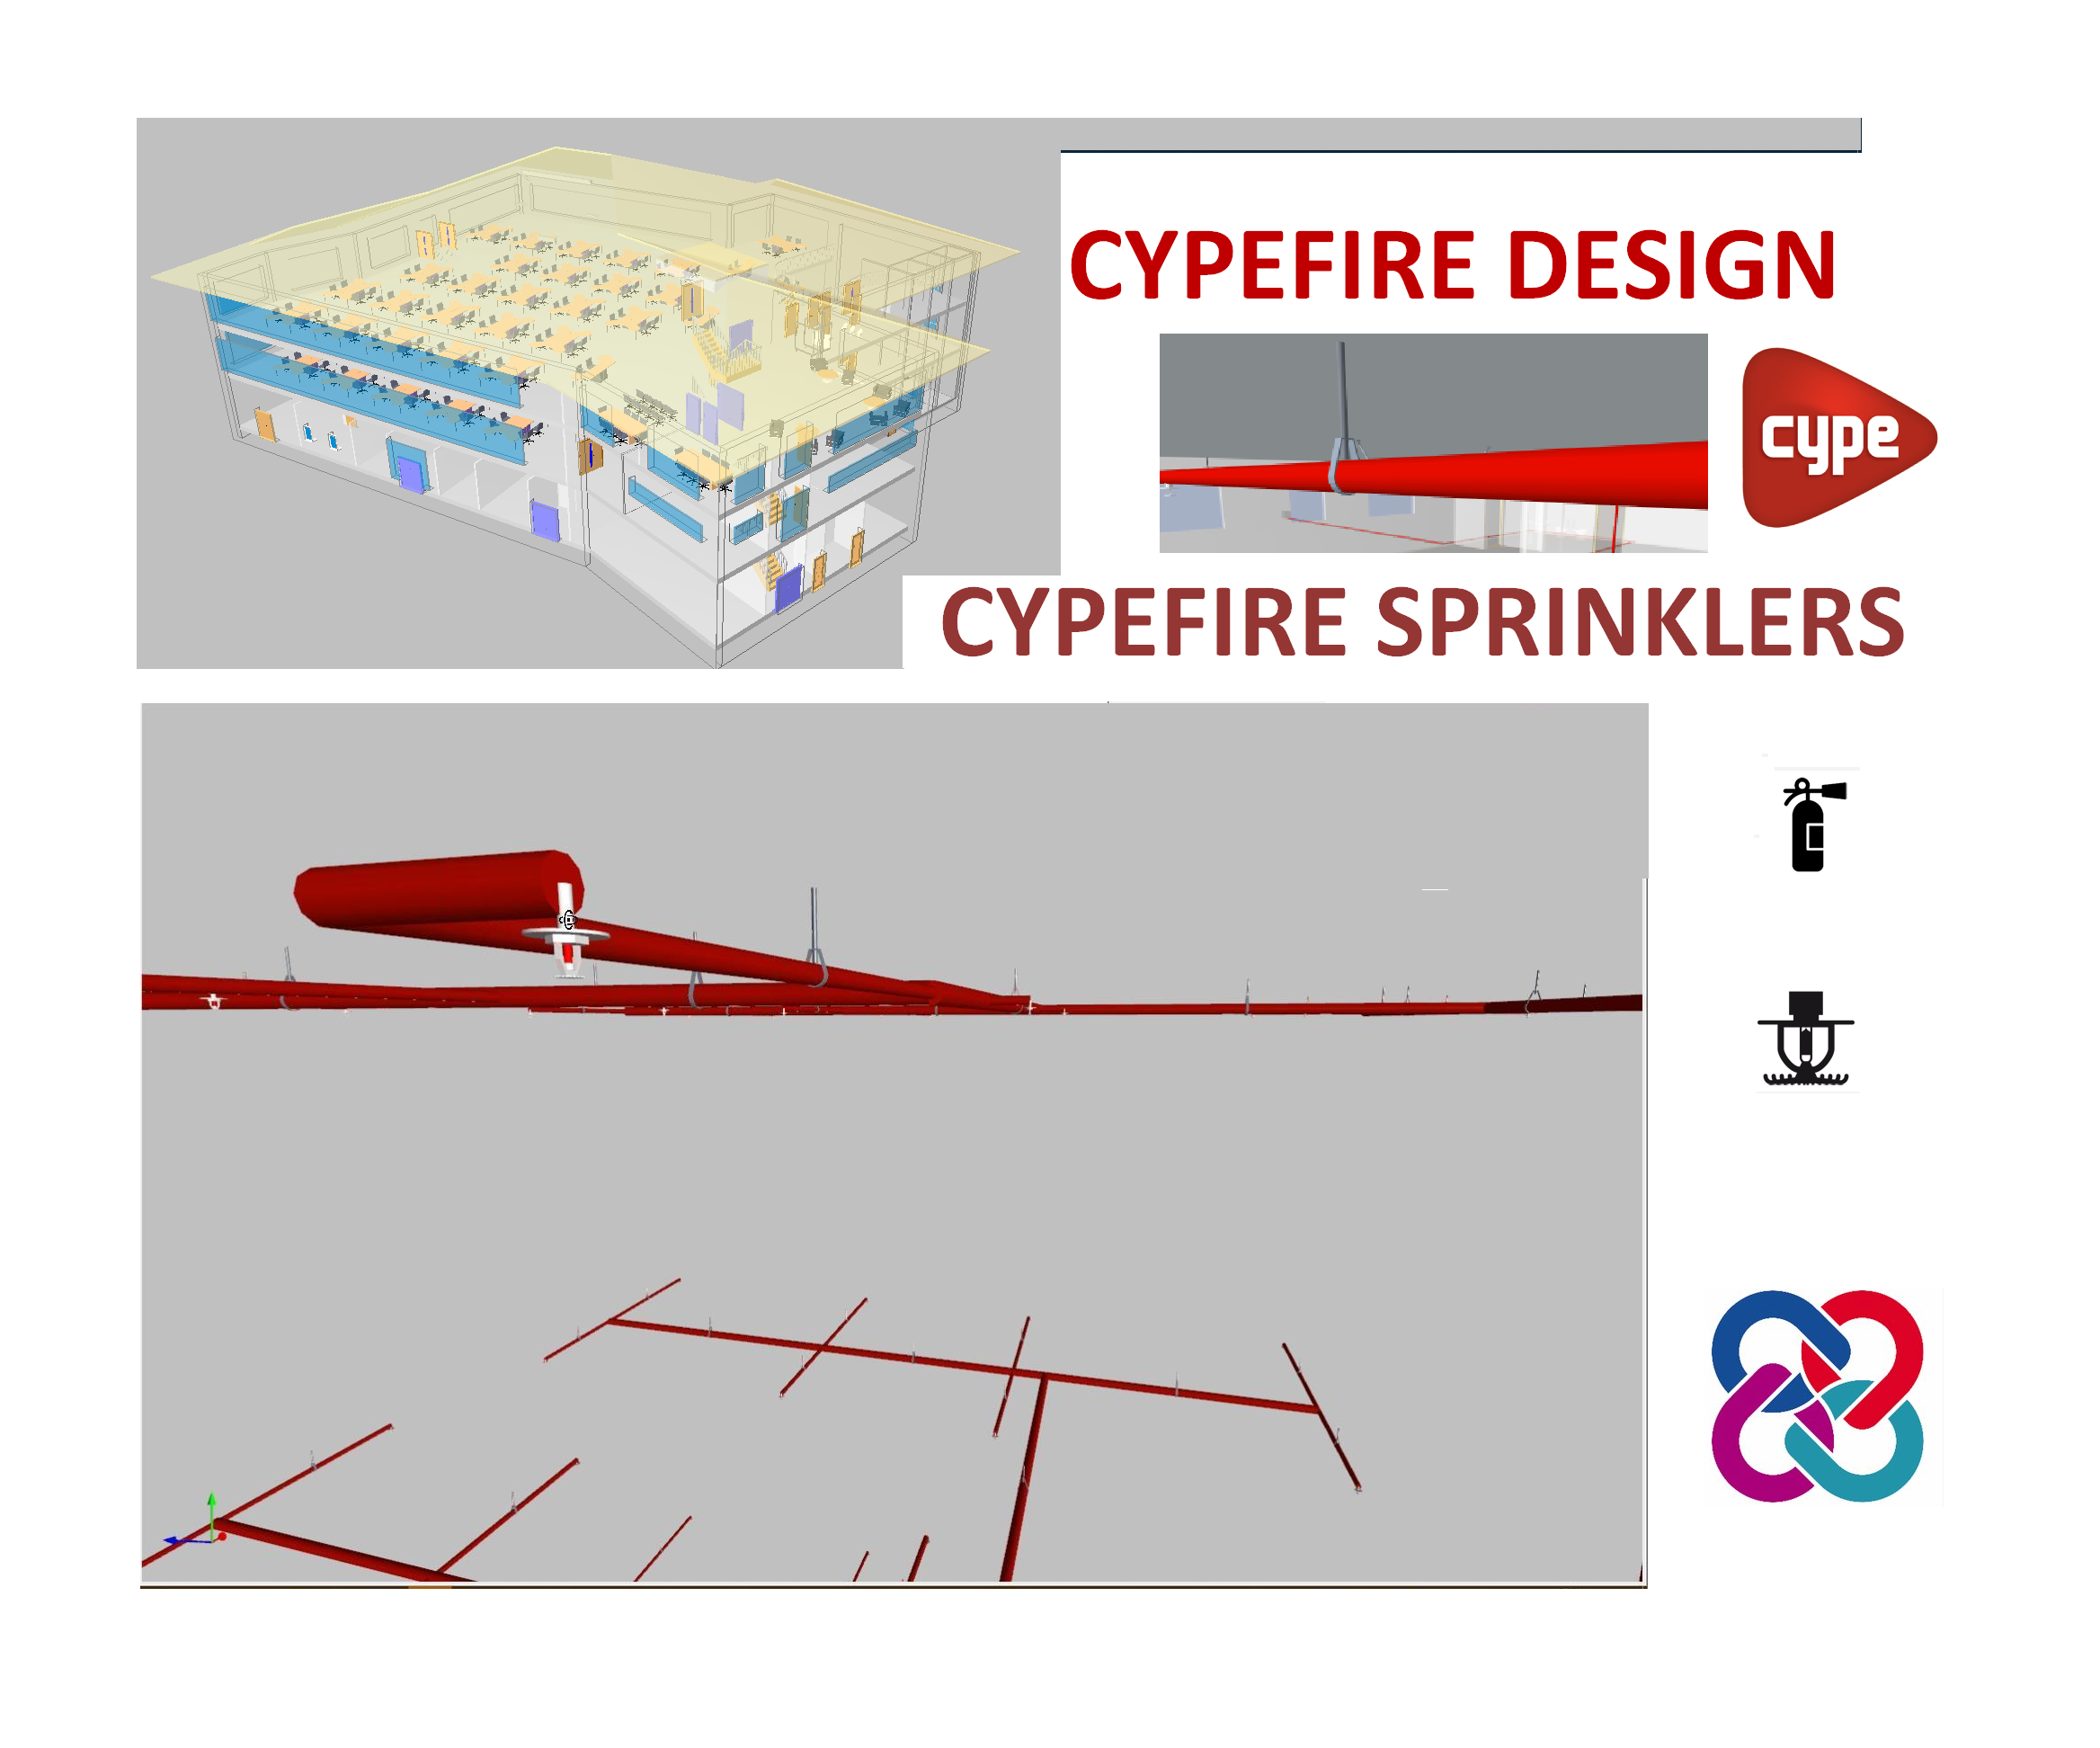 CYPEFIRE SPINKLERS POST MARCH